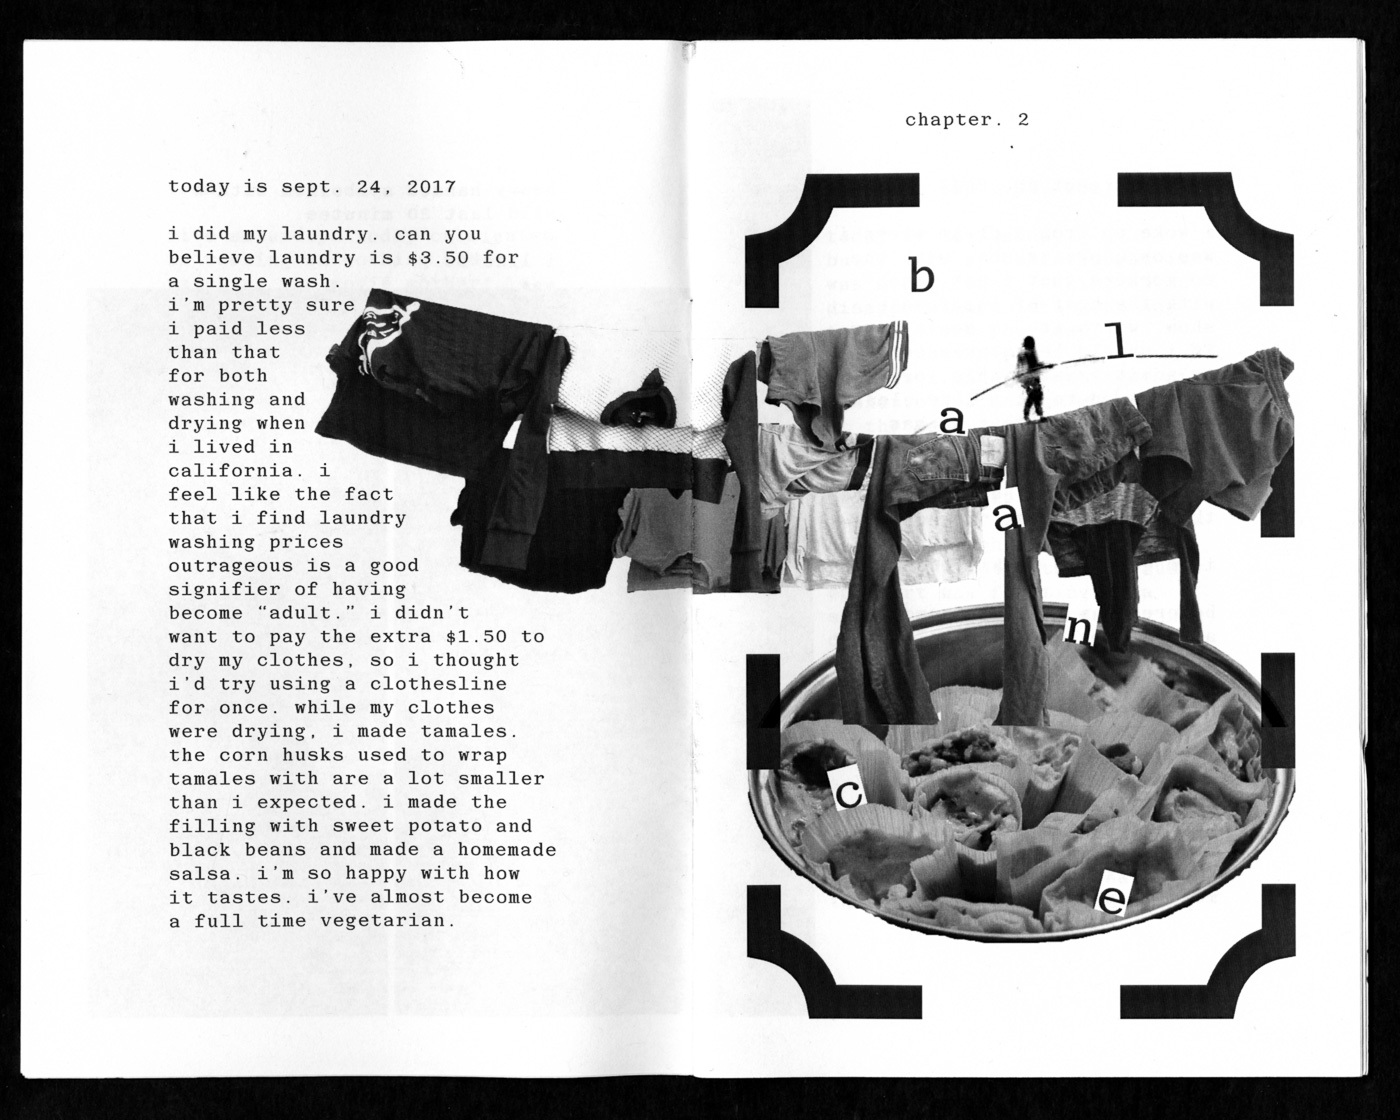 an interior spread from the zine 2A.M. Gumbo. there is an image of a clothing line and a tightrope walker walking across it